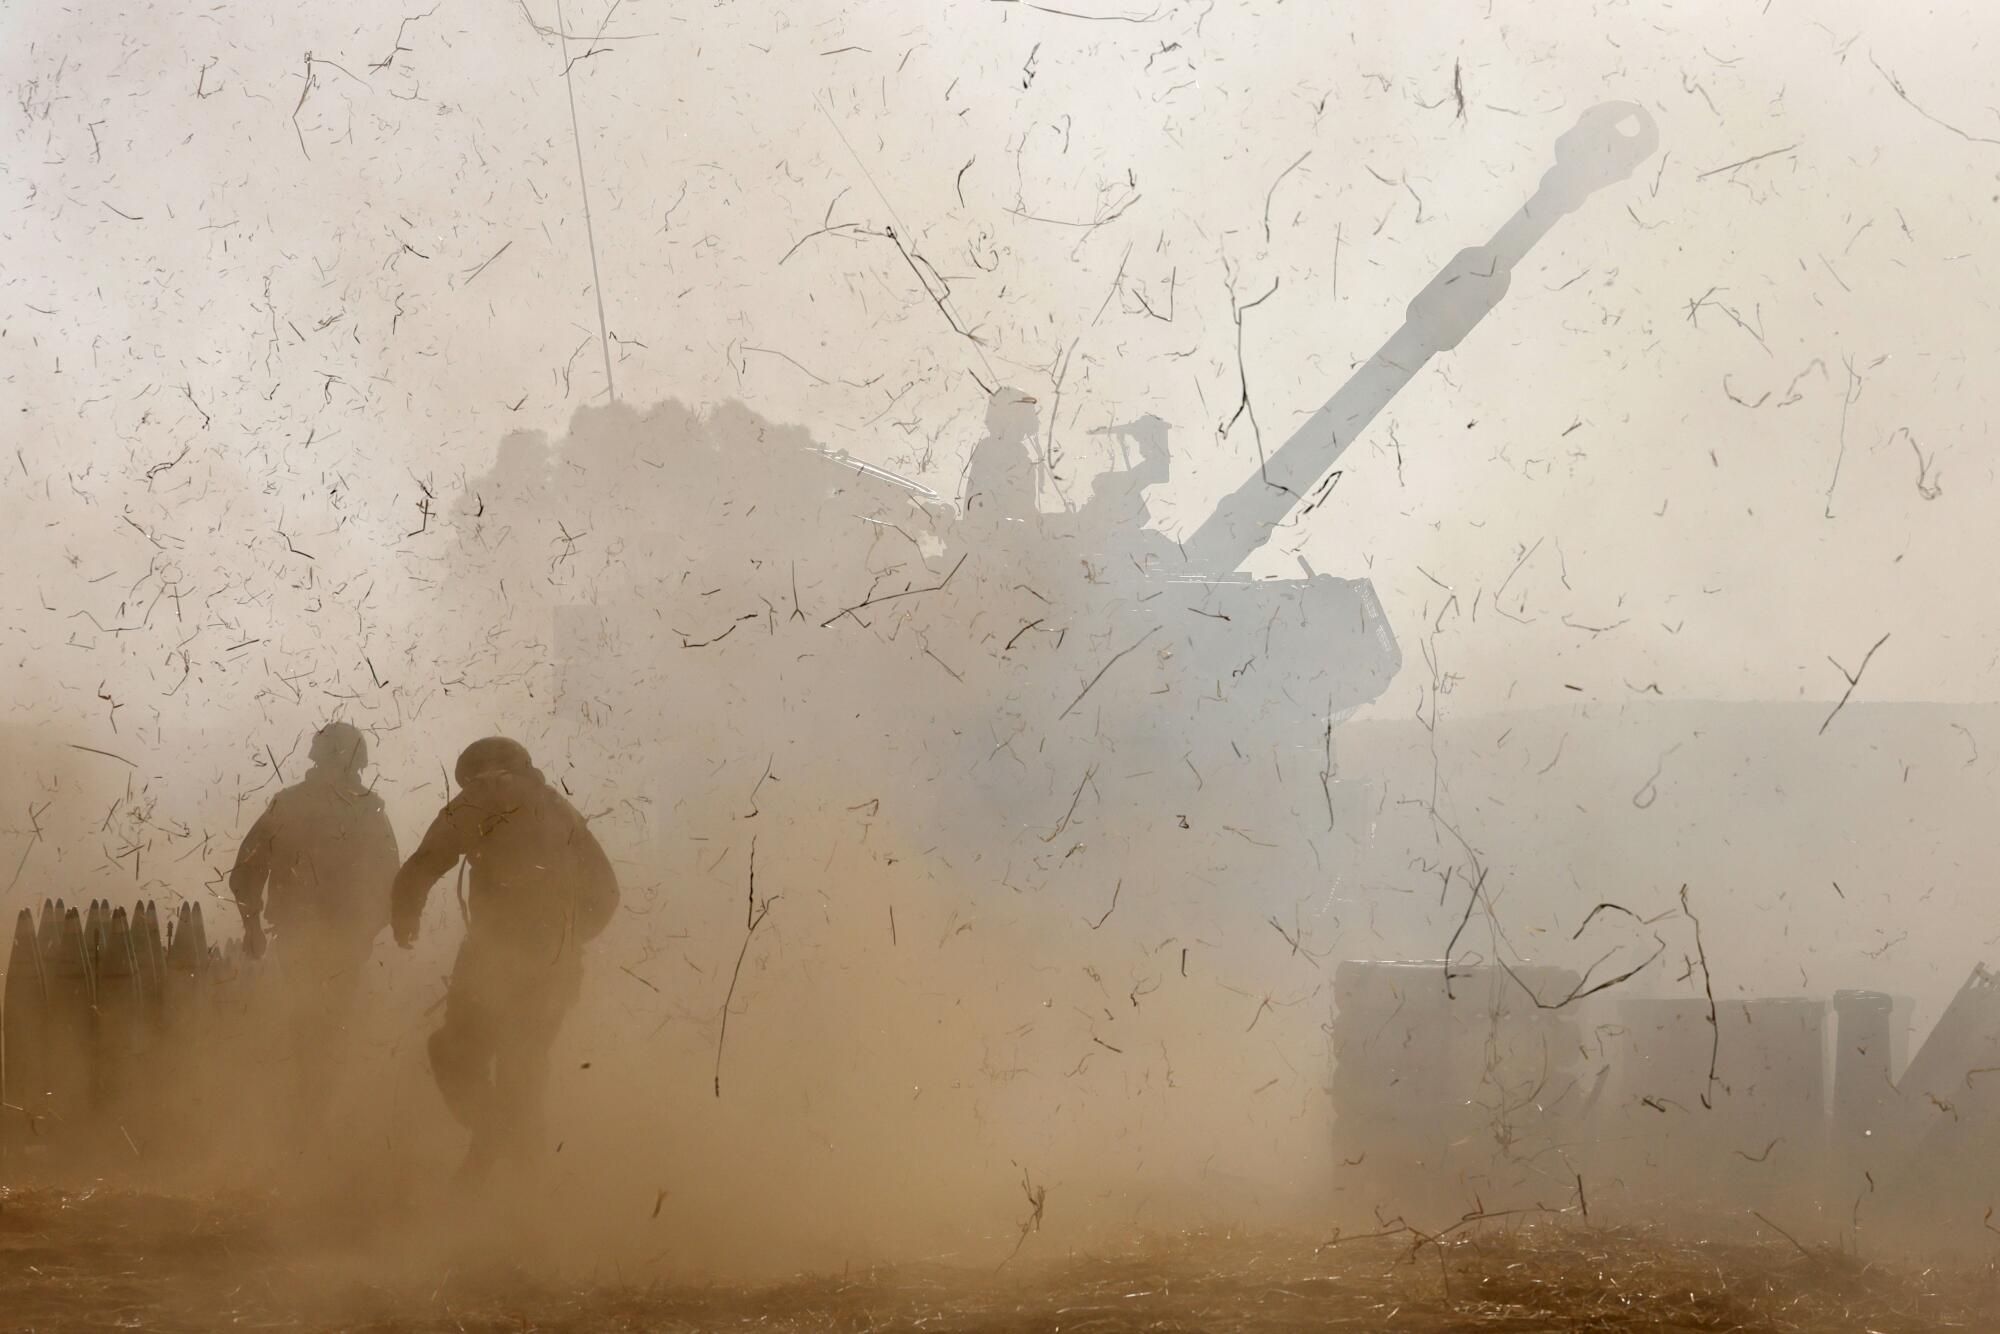 Israeli soldiers fire a howitzer amid smoke and flying debris